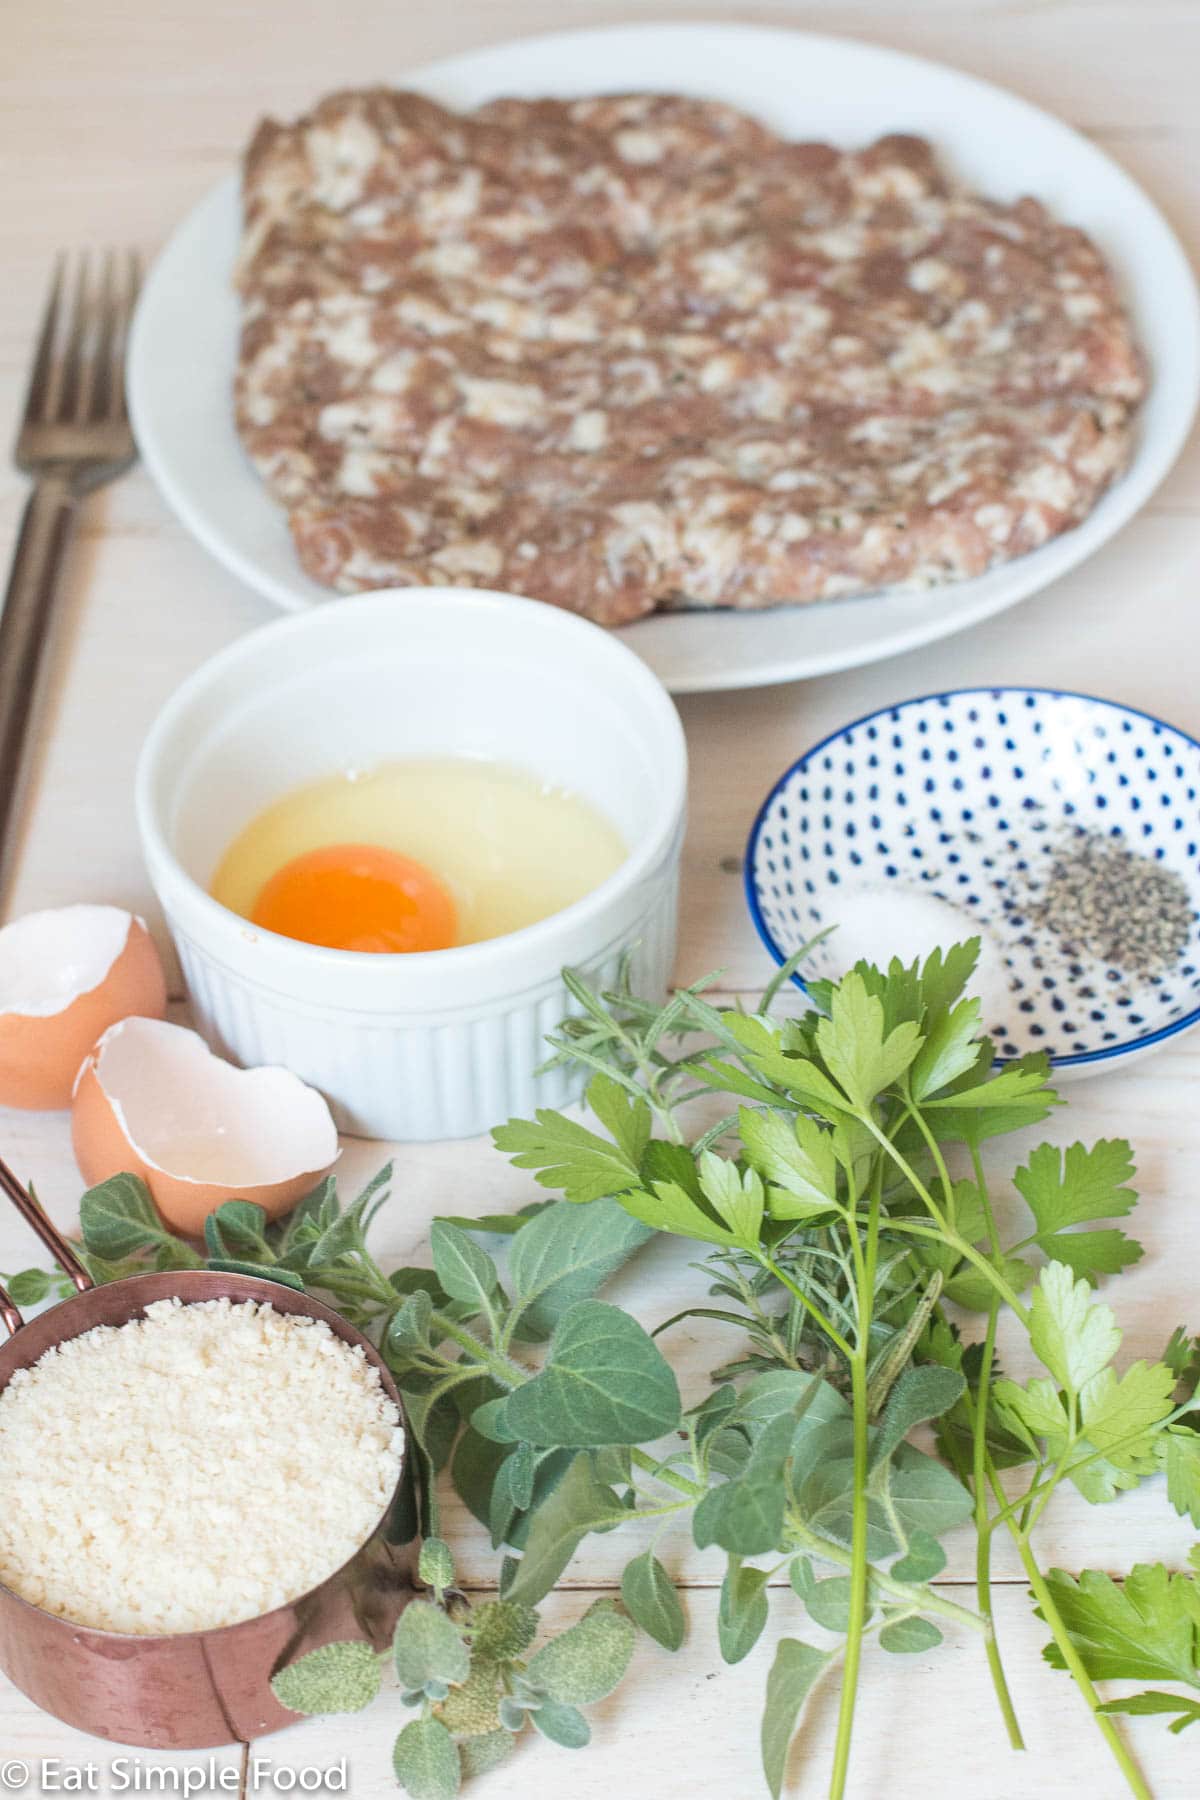 Ingredients on a white table: white plate of ground sausage, one cracked egg in a white bowl, ½ cup panko bread crumbs, container of salt and pepper, and fresh herbs (oregano, rosemary, parsley). Side view.